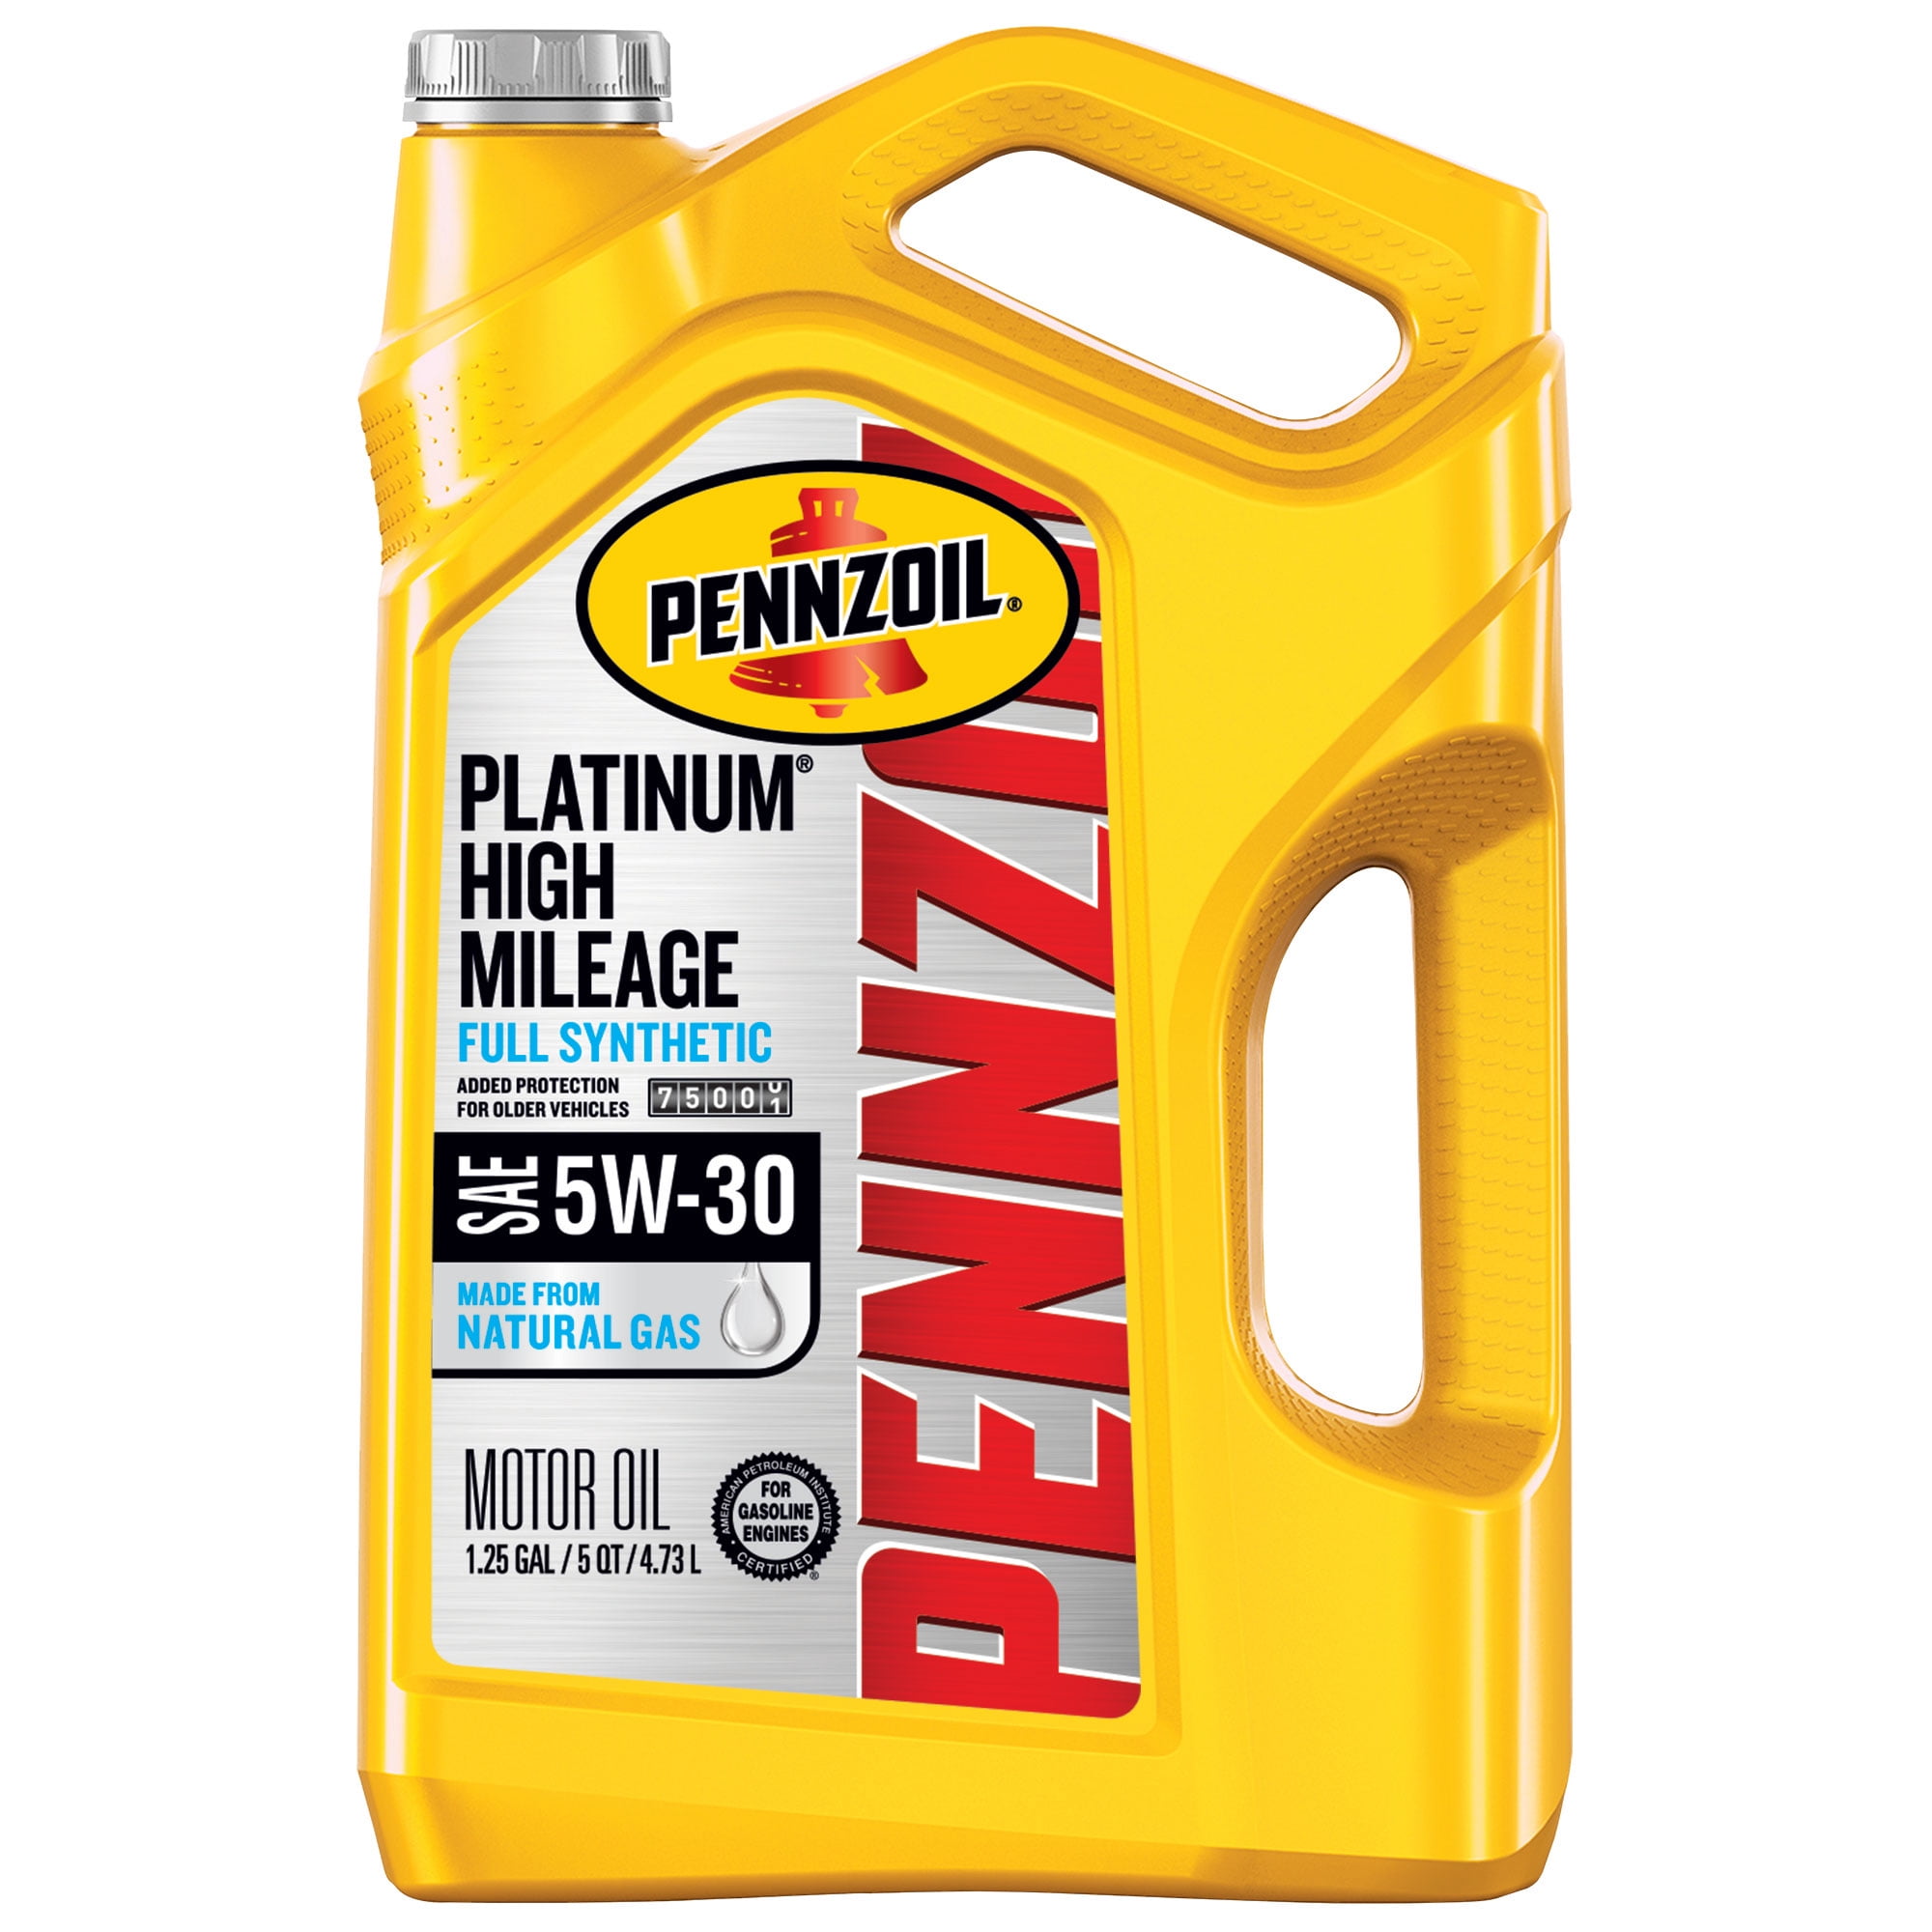 buy-pennzoil-platinum-high-mileage-full-synthetic-5w-30-motor-oil-5